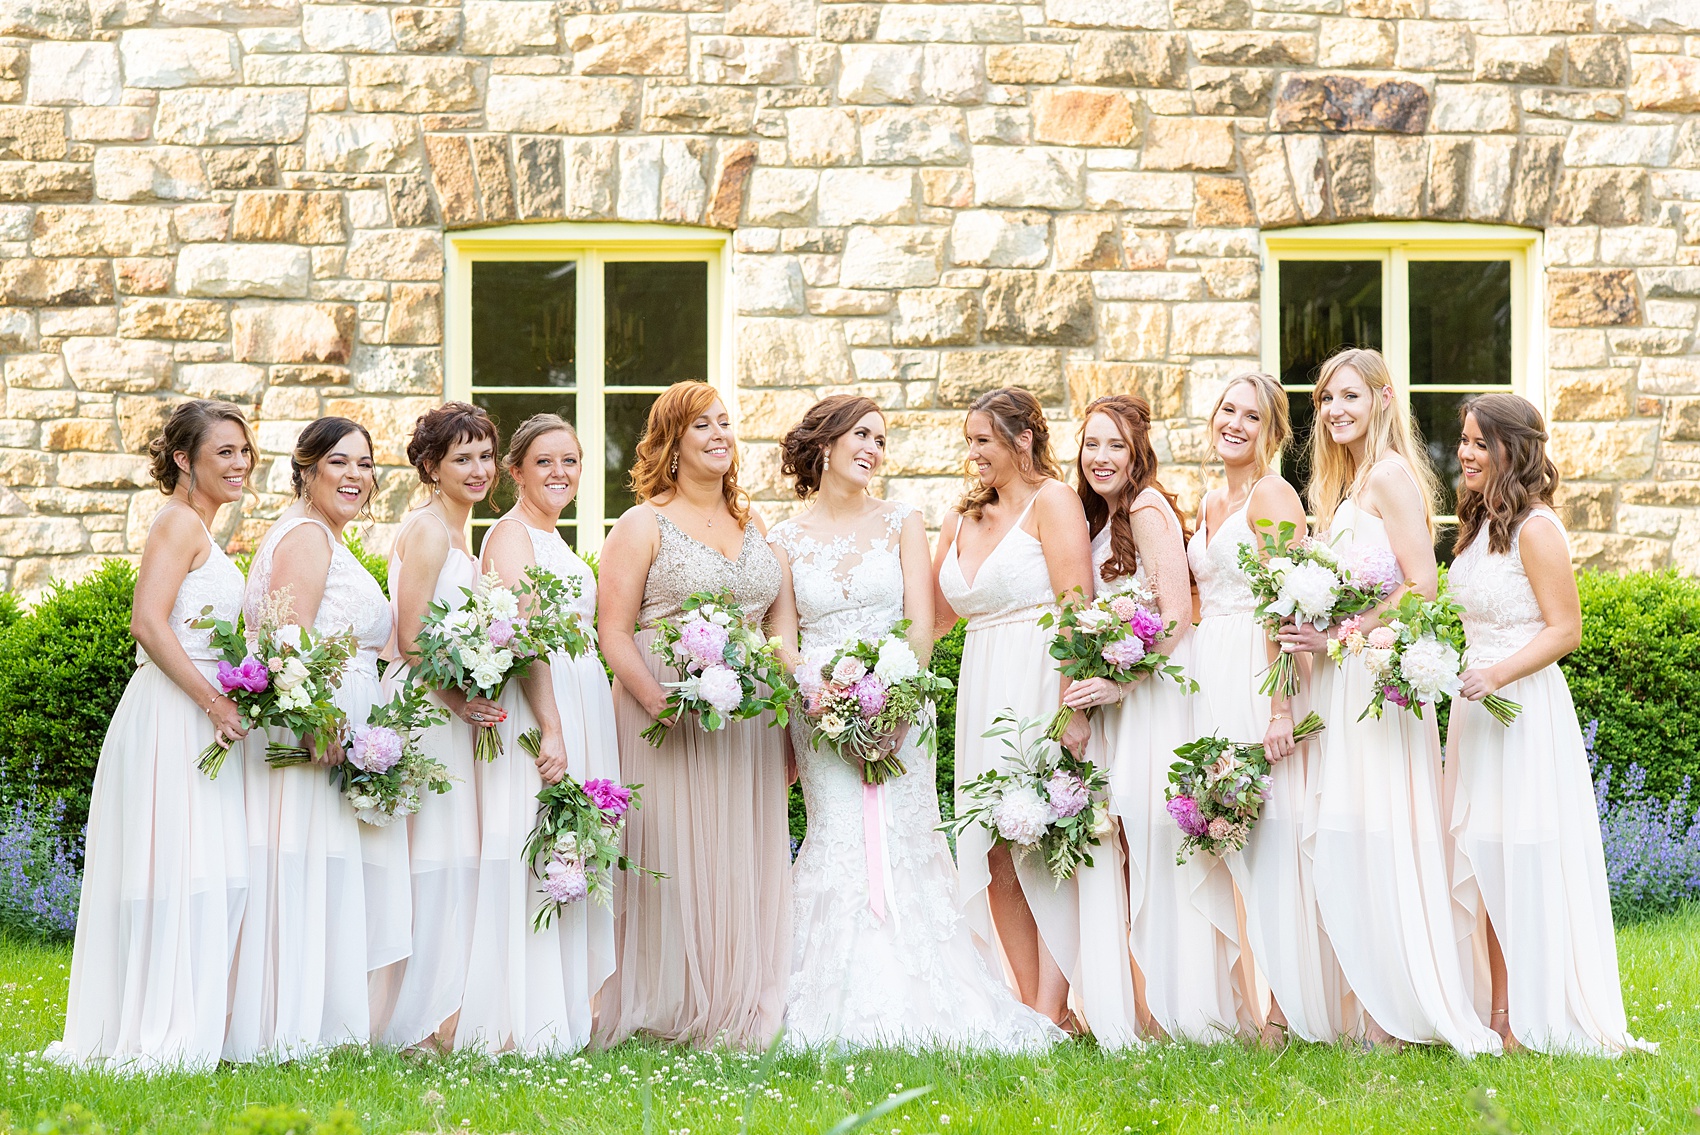 A summer wedding at Olde Mill Inn, NJ. Photos by Mikkel Paige Photography. This New Jersey venue is a great option for an event not too far from NYC. The wedding party photos were at nearby Cross Estate Gardens, a beautiful lush area for bridal party photos. The bridesmaids wore light pink, mis-matched gowns. Click through for their complete wedding recap! #OldeMillInn #NJwedding #NJweddingphotographer #mikkelpaige #NewJerseyWeddingVenue #NewJerseyWedding #CrossEstateGardens #weddingdetails #bridalparty #pinkbridesmaids #mismatcheddresses #mismatchedbridesmaids #peonybouquets